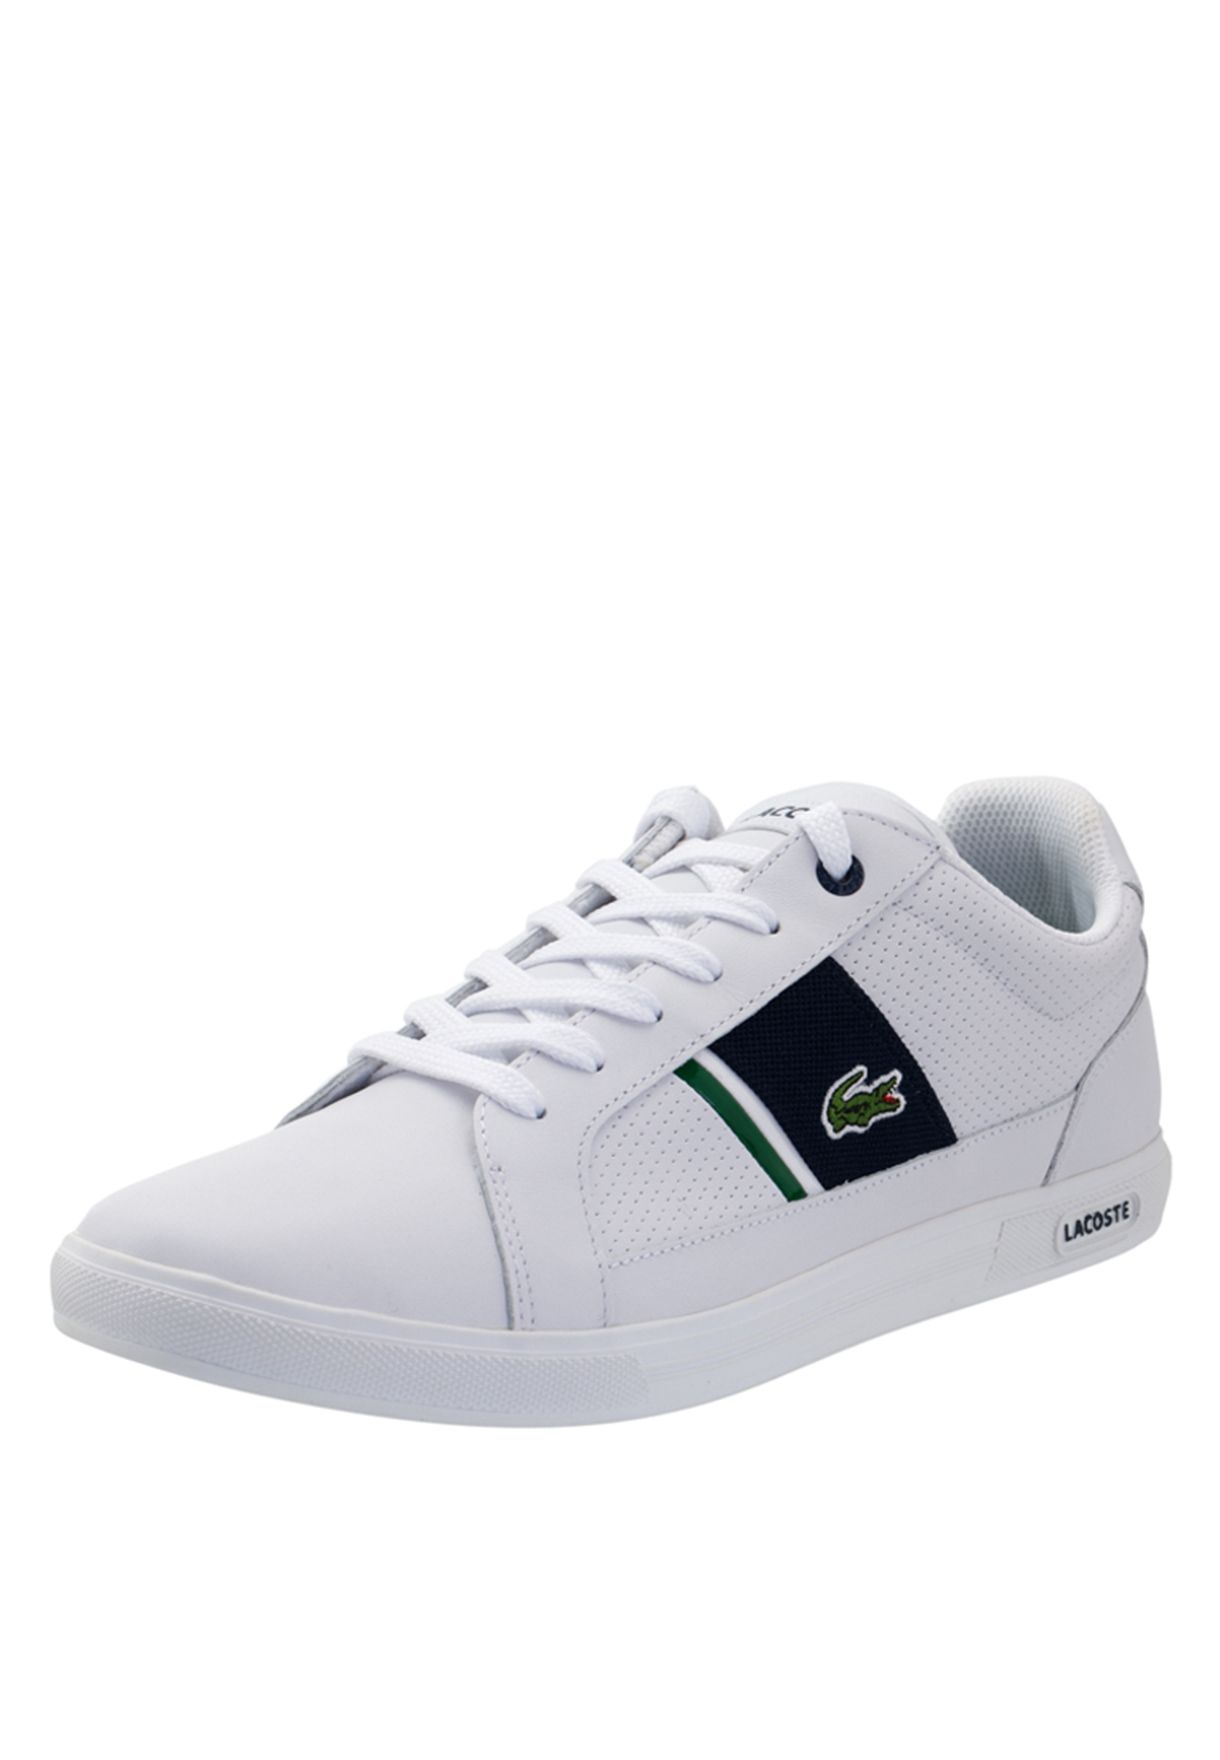 lacoste europa trainers in white